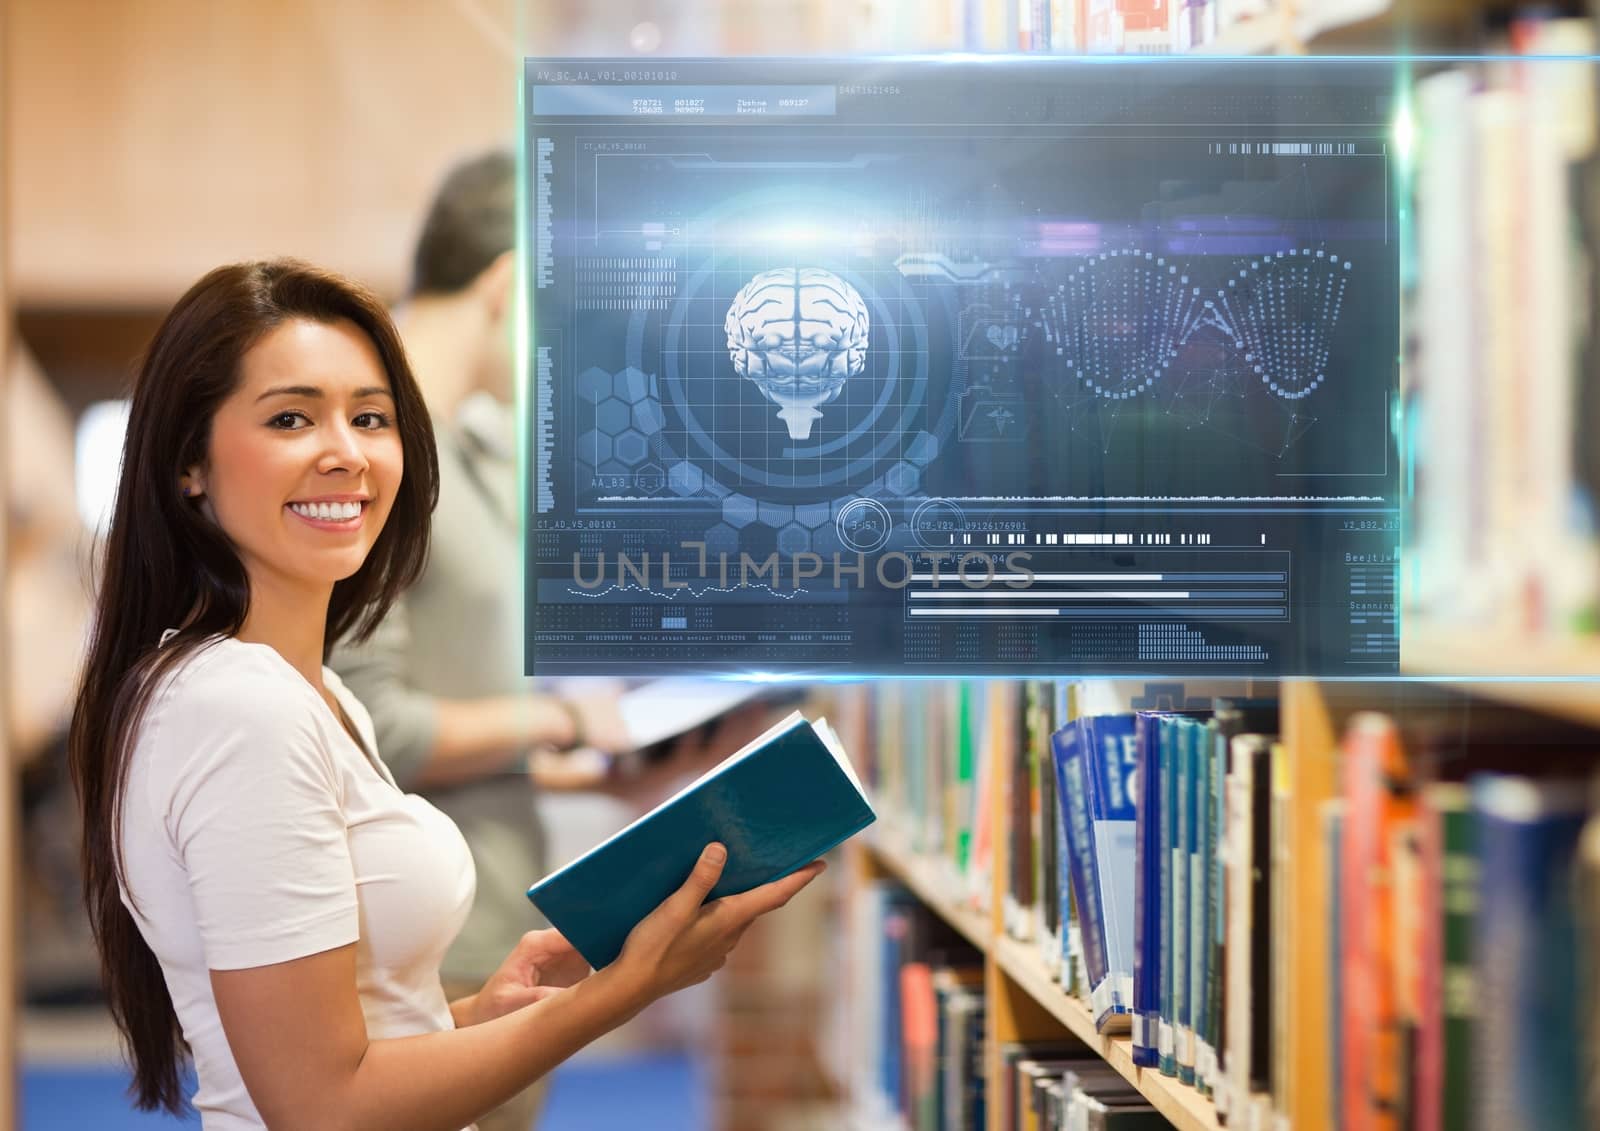 Female Student studying with book and science education interface graphics overlay by Wavebreakmedia